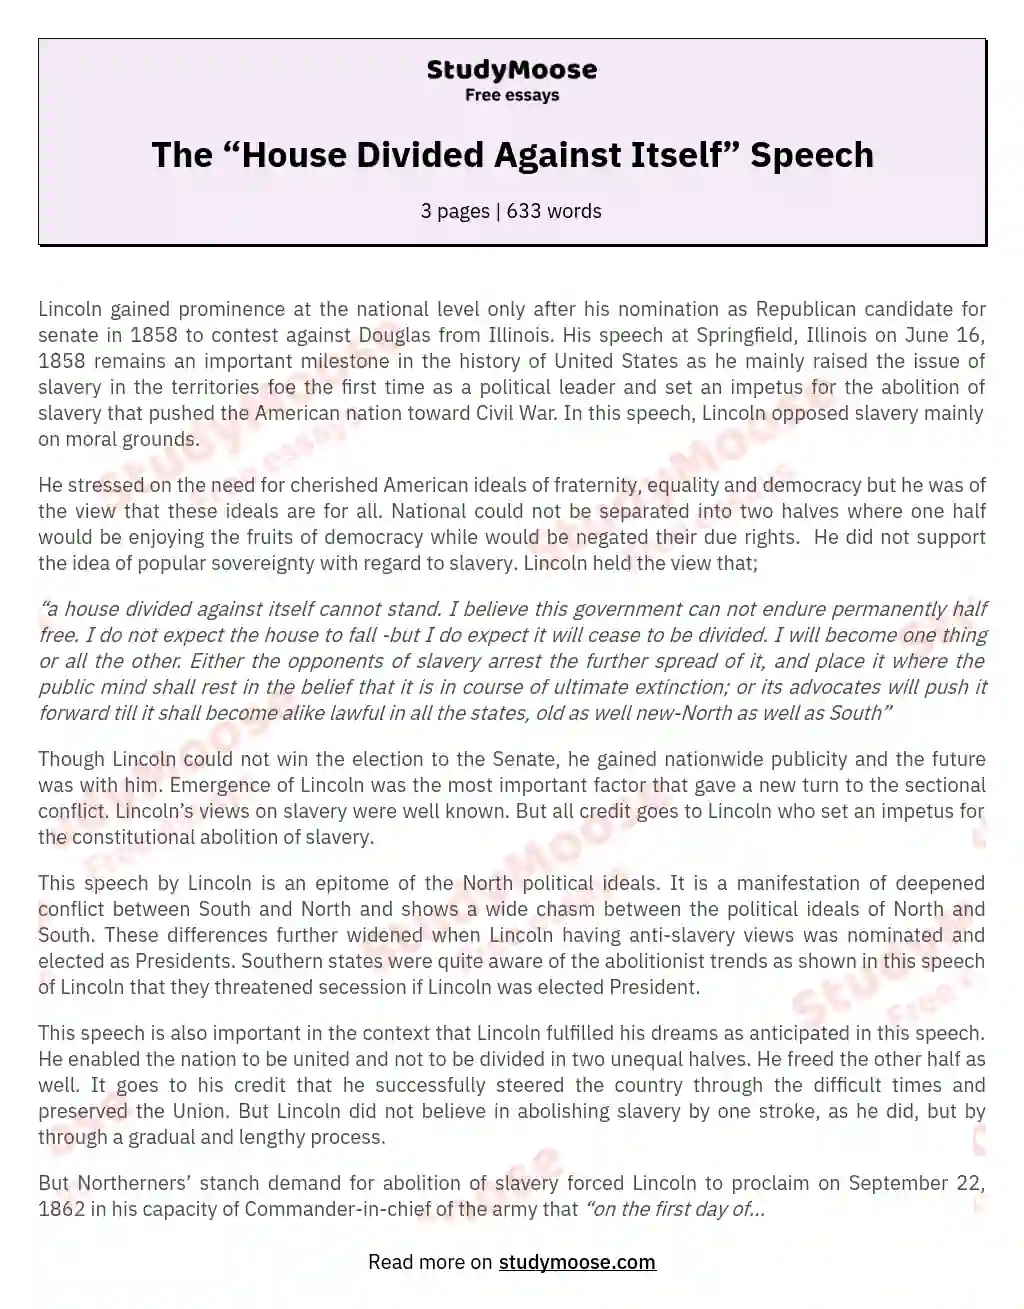 The “House Divided Against Itself” Speech essay